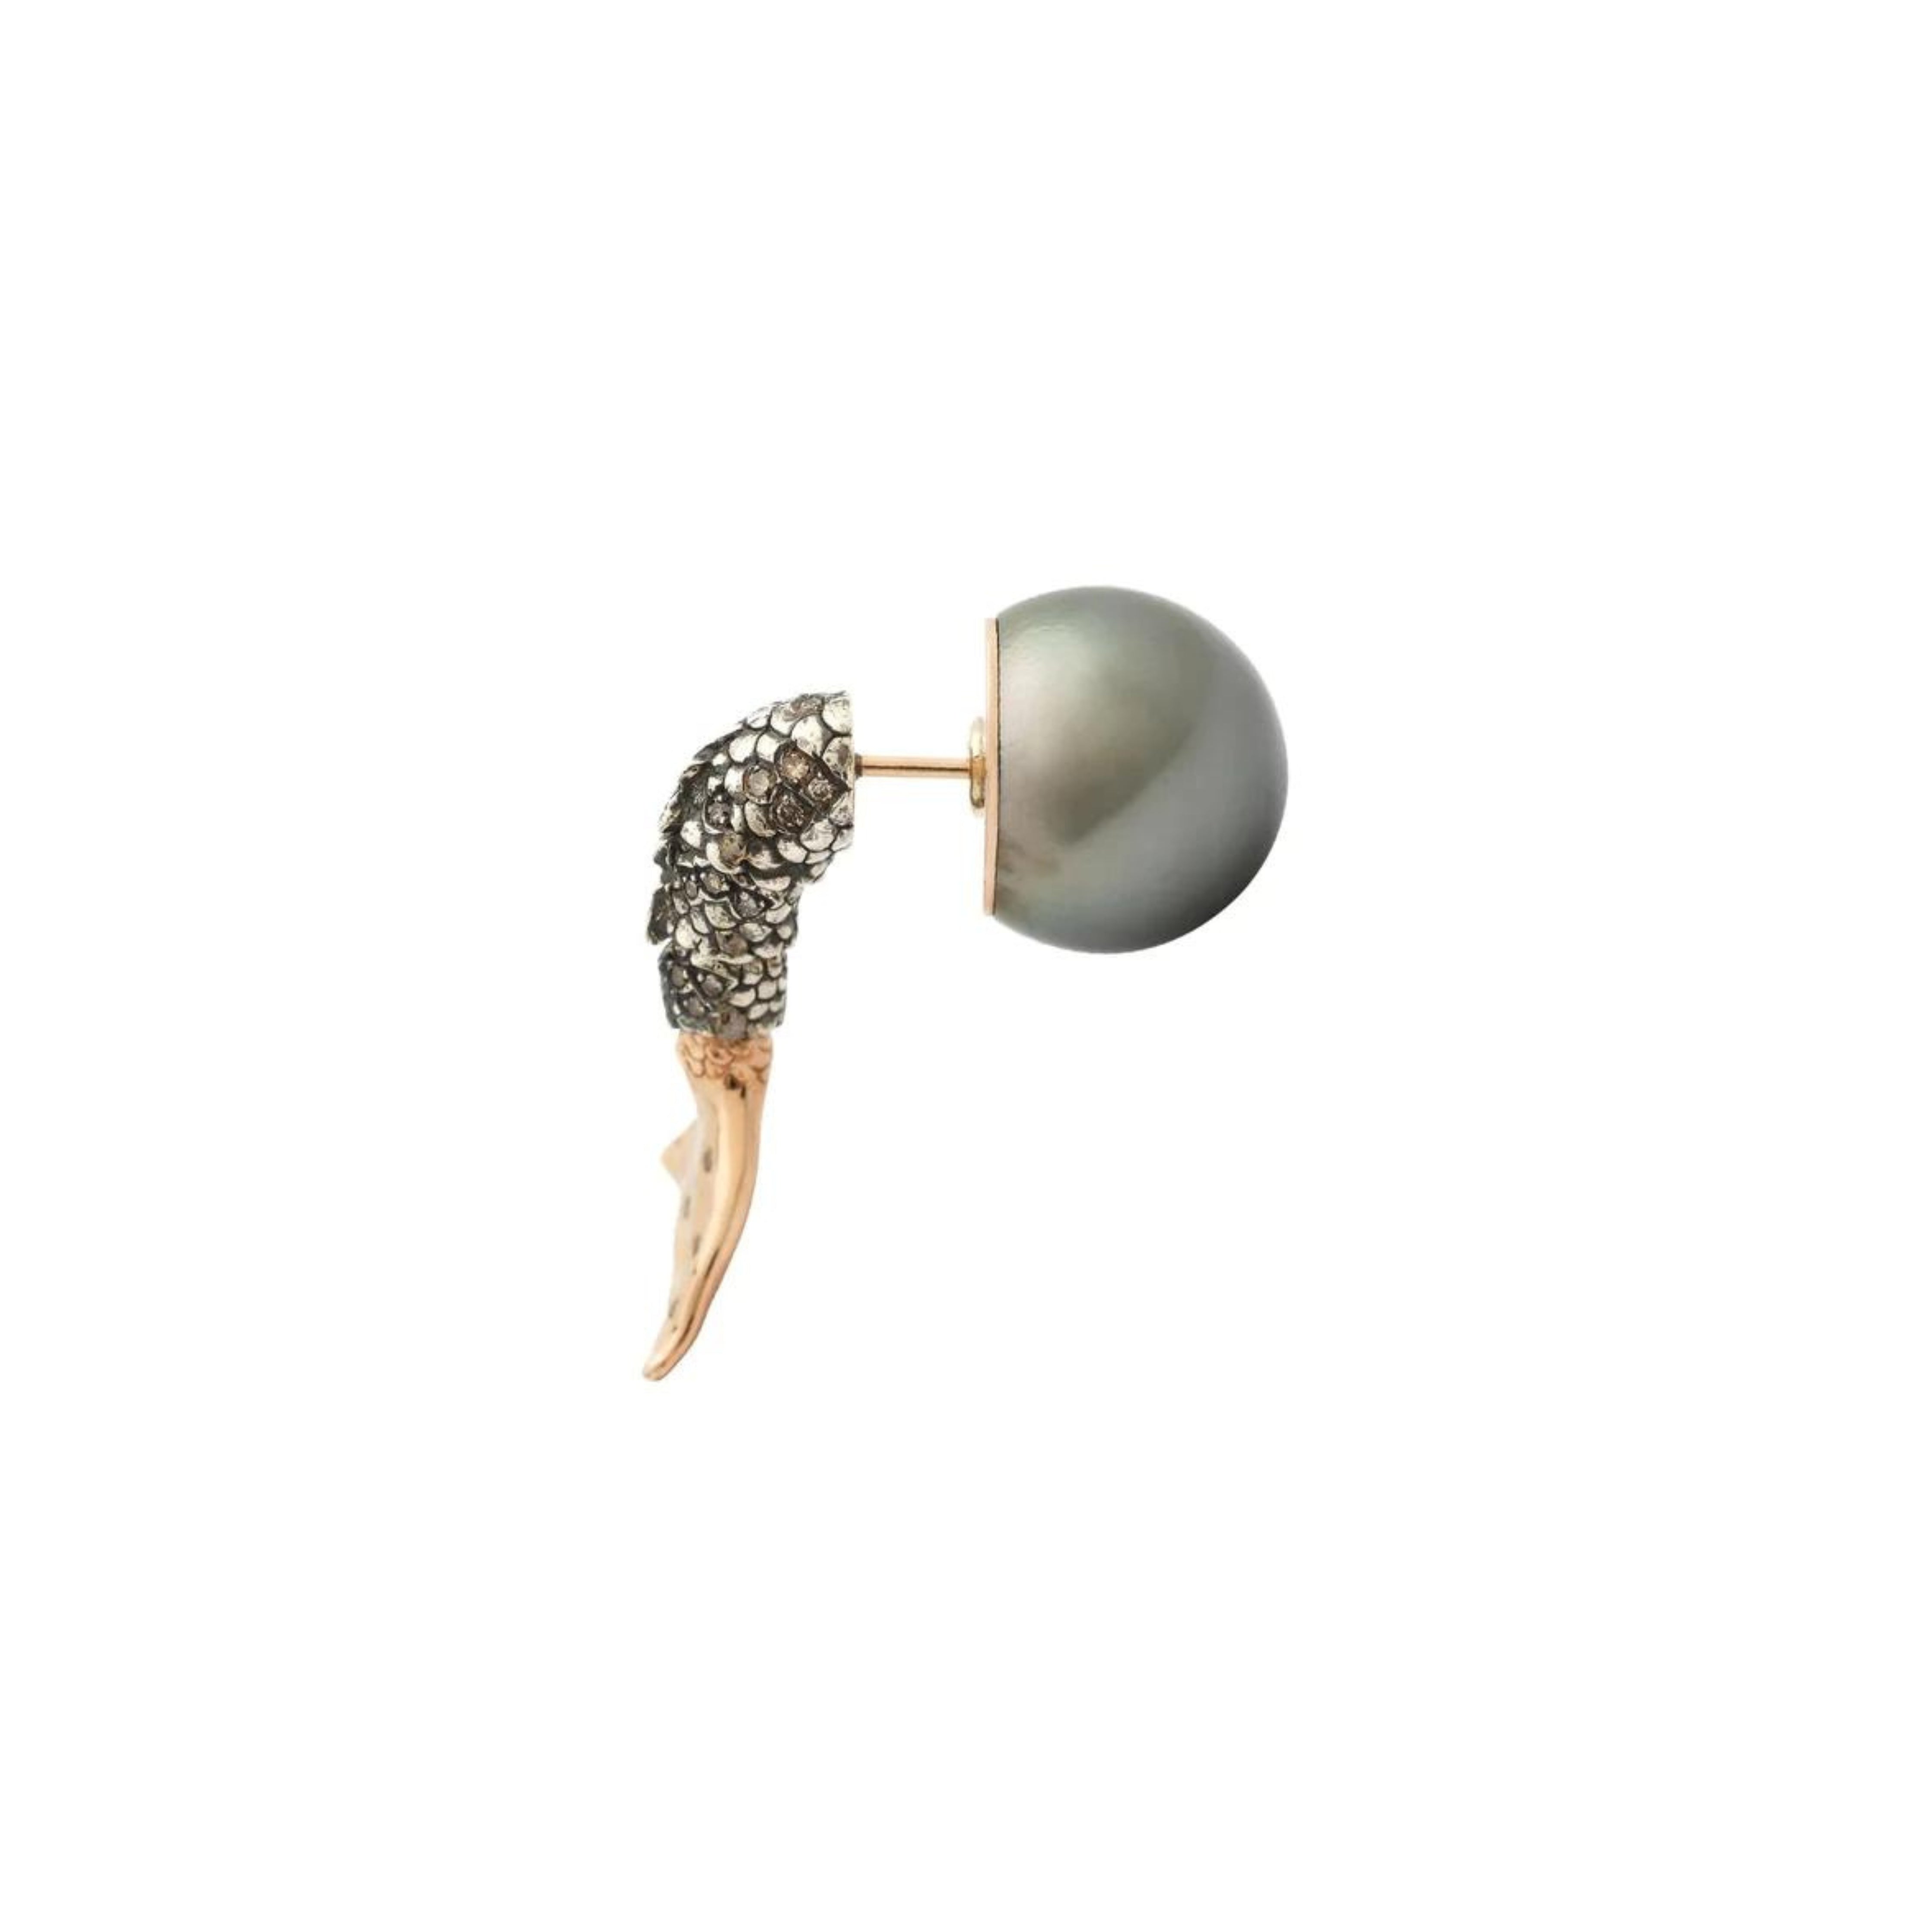 Bibi van der Velden Mermaid Pearl Earring. Made in 18K rose gold and sterling silver with a deep blue pearl and brown diamonds. Featuring a moving mermaid&#39;s tail with moving scales and gold fin. Shown from the side.